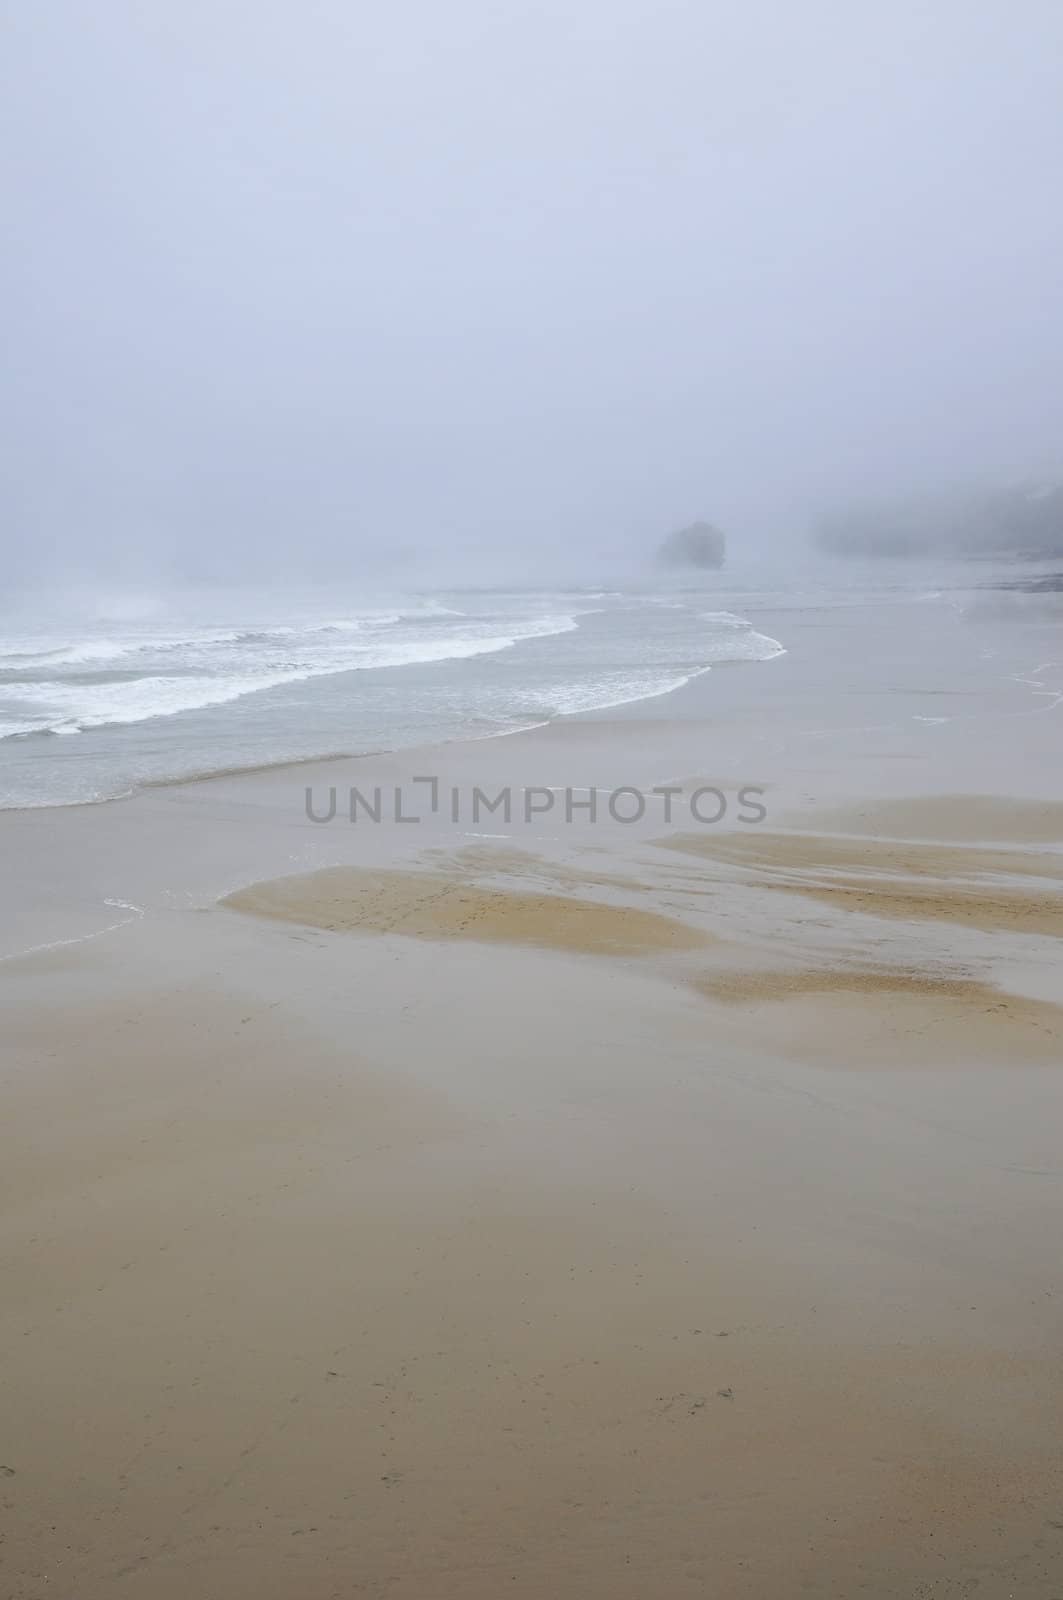 Beach under the rain with a misty weather by shkyo30